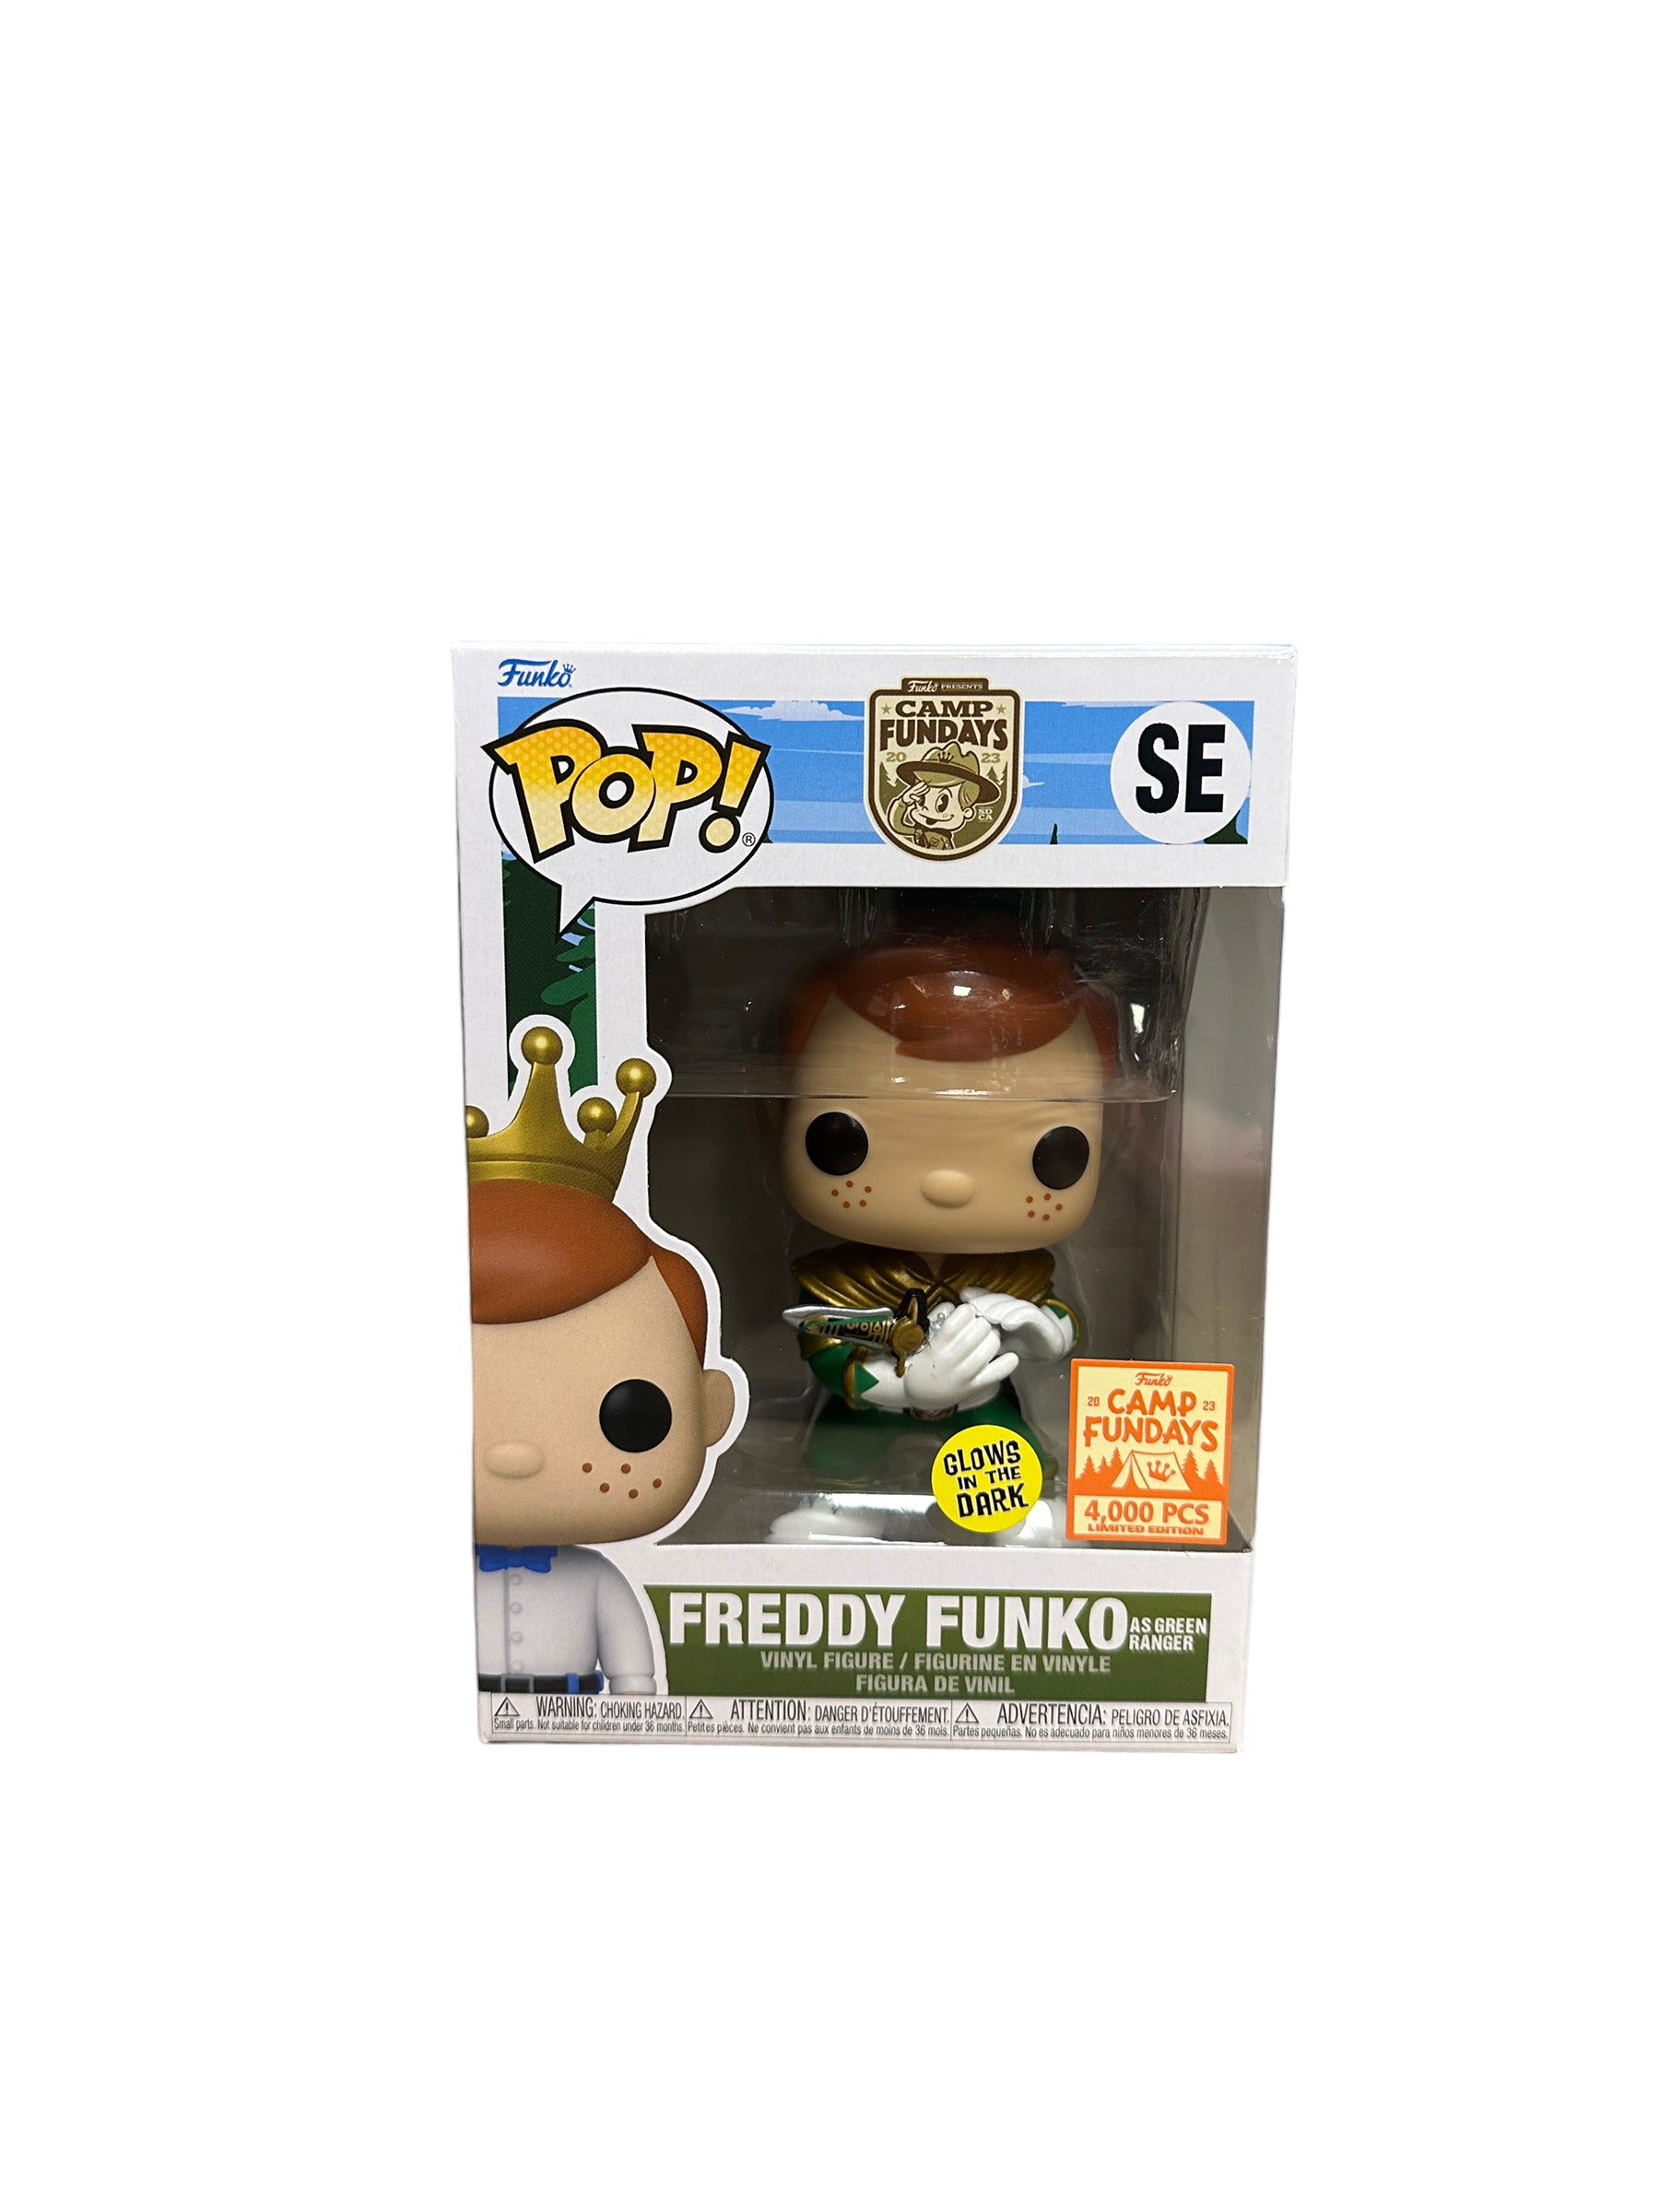 Freddy Funko as Green Ranger (Glows in the Dark) Funko Pop! - Power Rangers - SDCC 2023 Camp Fundays Exclusive LE4000 Pcs - Condition 8.75/10